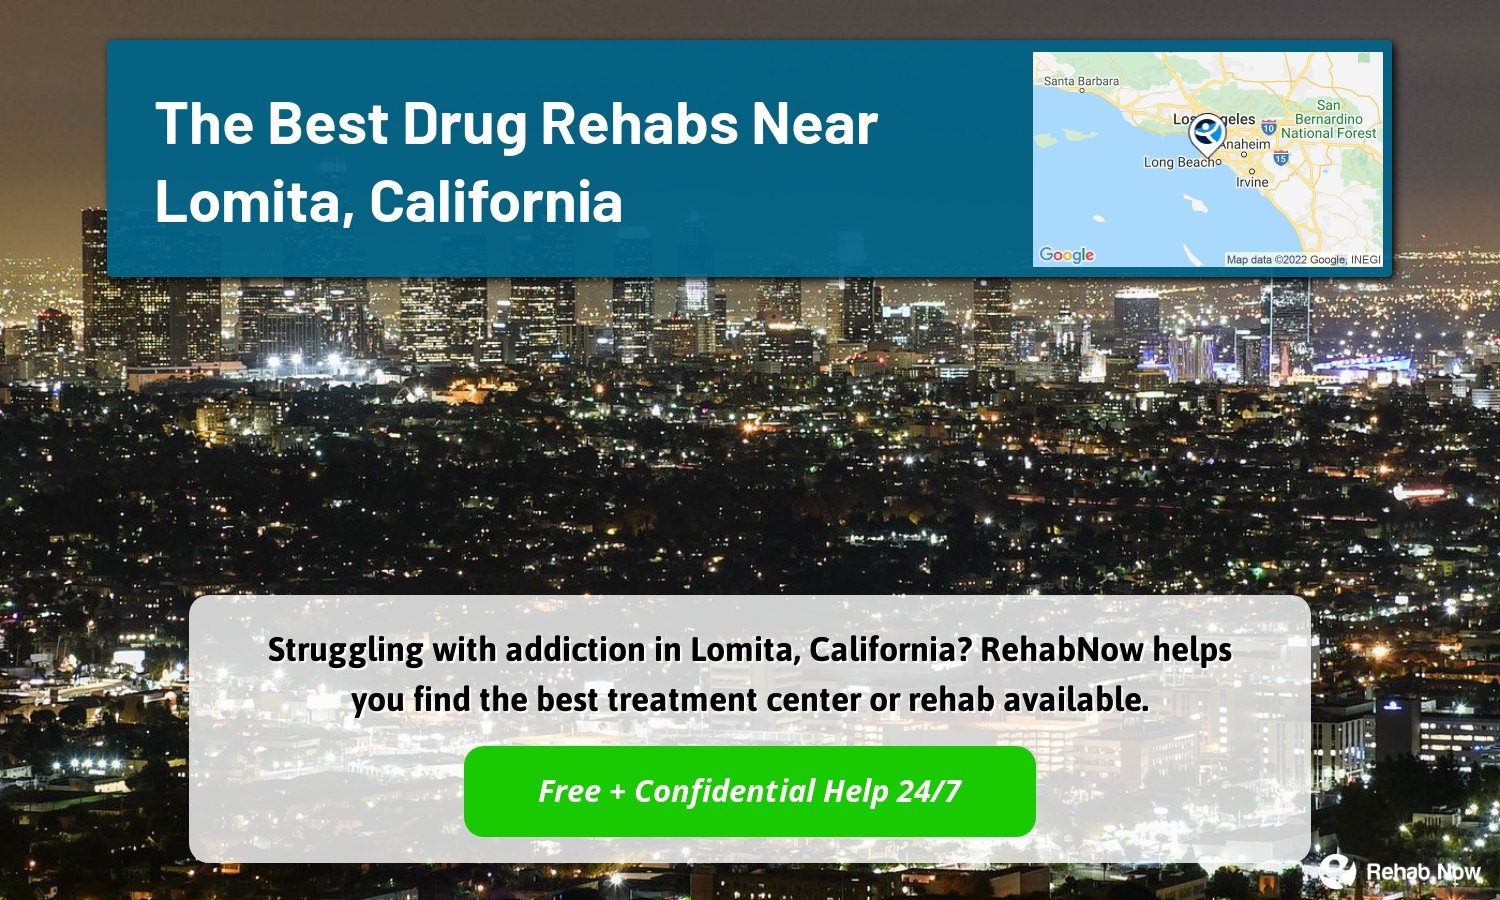 Struggling with addiction in Lomita, California? RehabNow helps you find the best treatment center or rehab available.